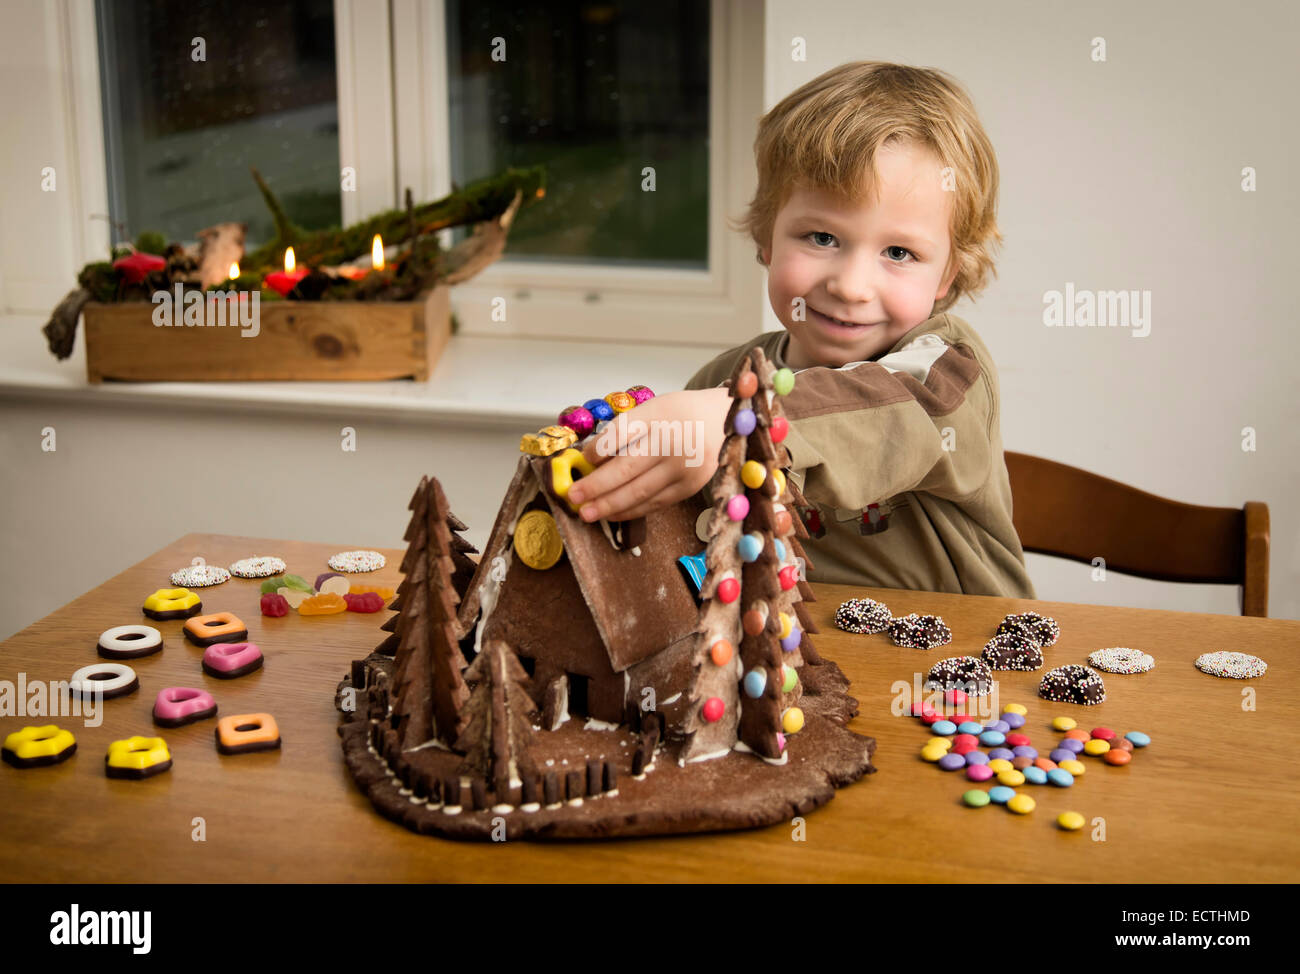 Boy, 4 years, decorating a gingerbread house Stock Photo